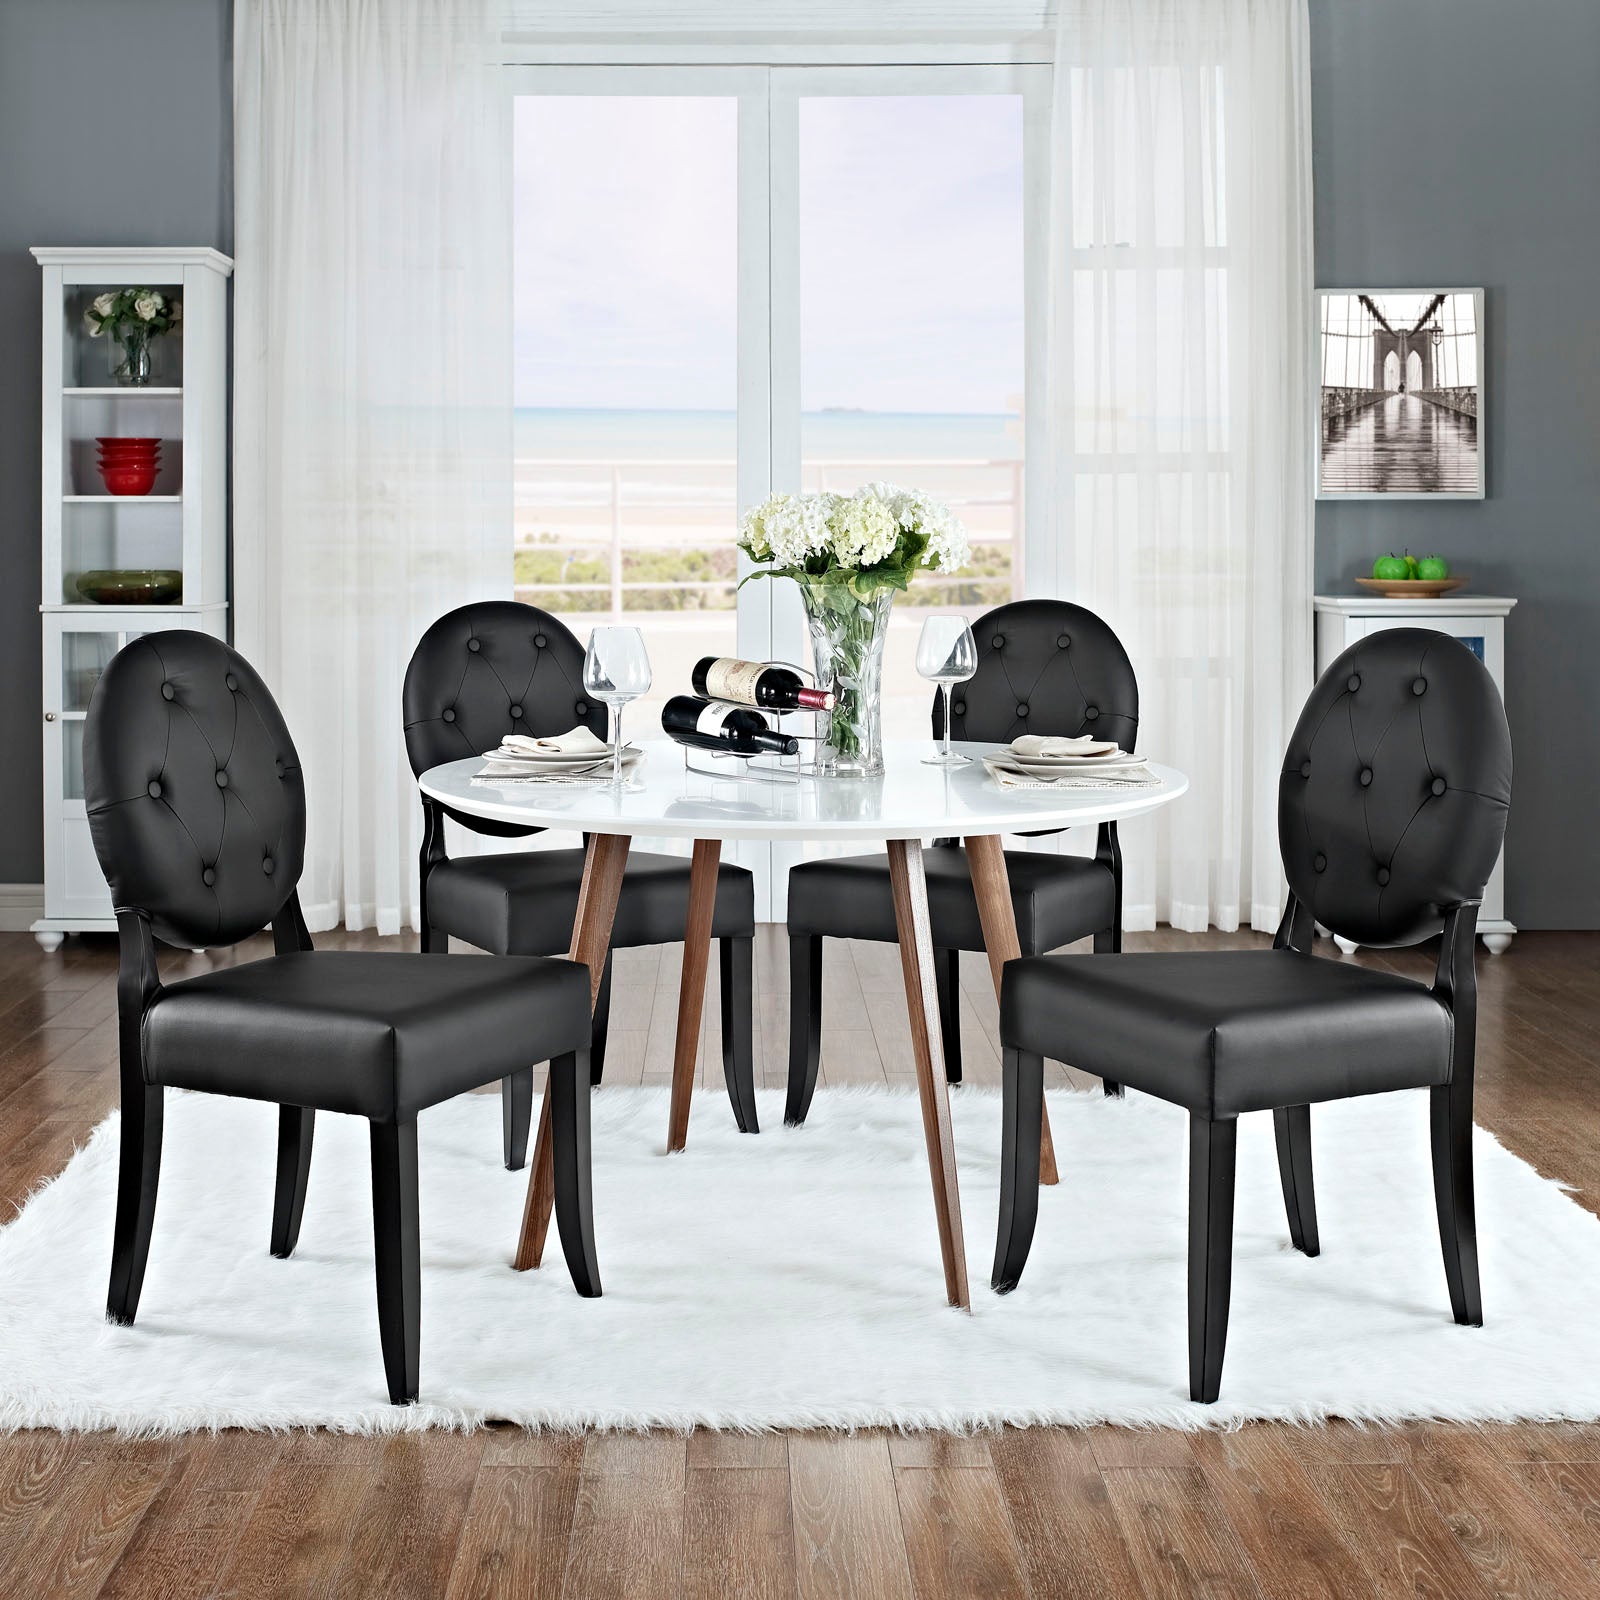 Button Dining Side Chair Set of 4 - East Shore Modern Home Furnishings